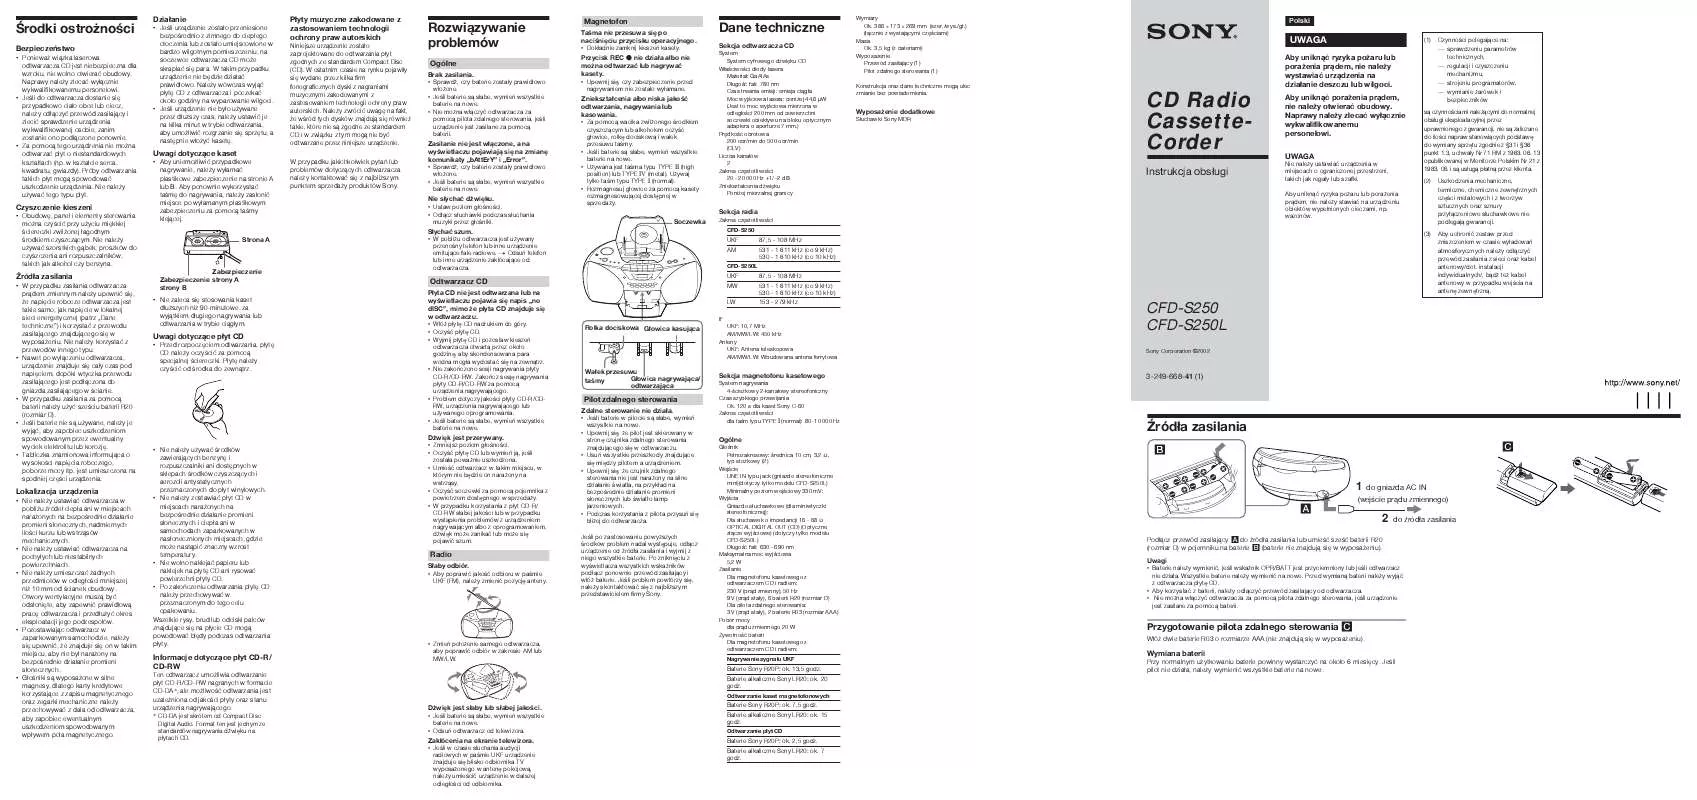 Mode d'emploi SONY CFD-S250